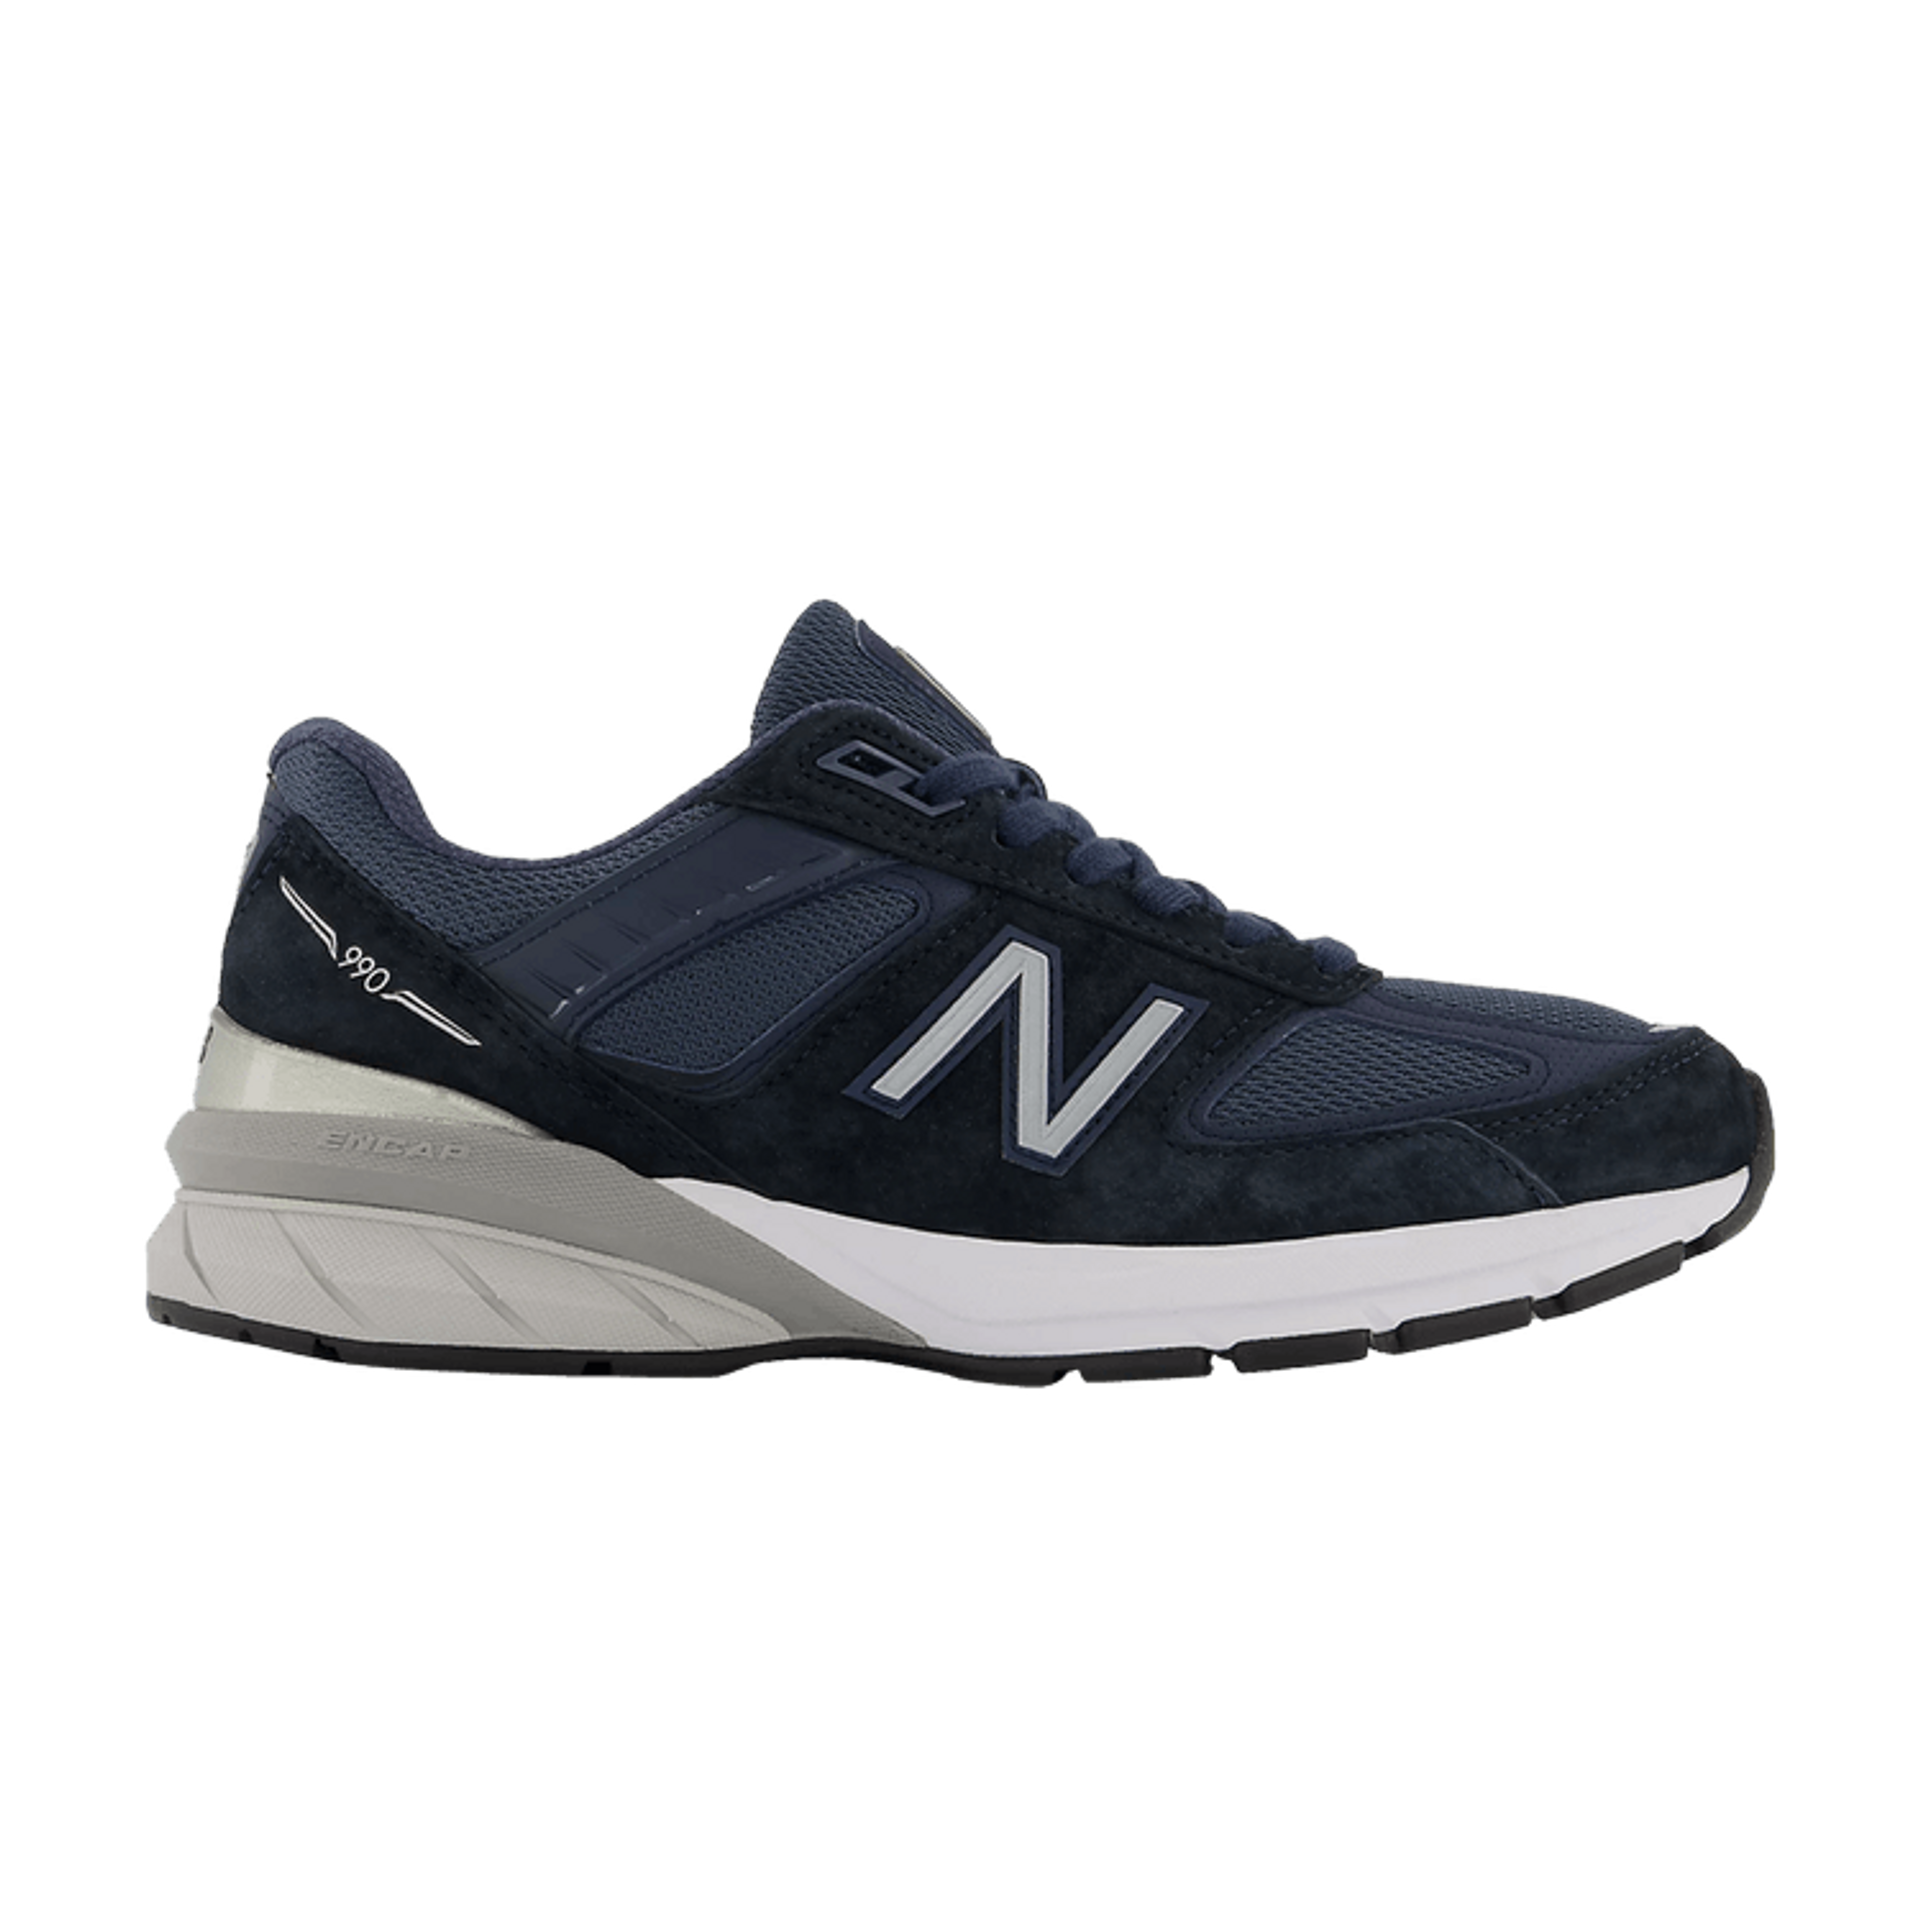 990v5 Made In USA 4E Wide 'Navy'